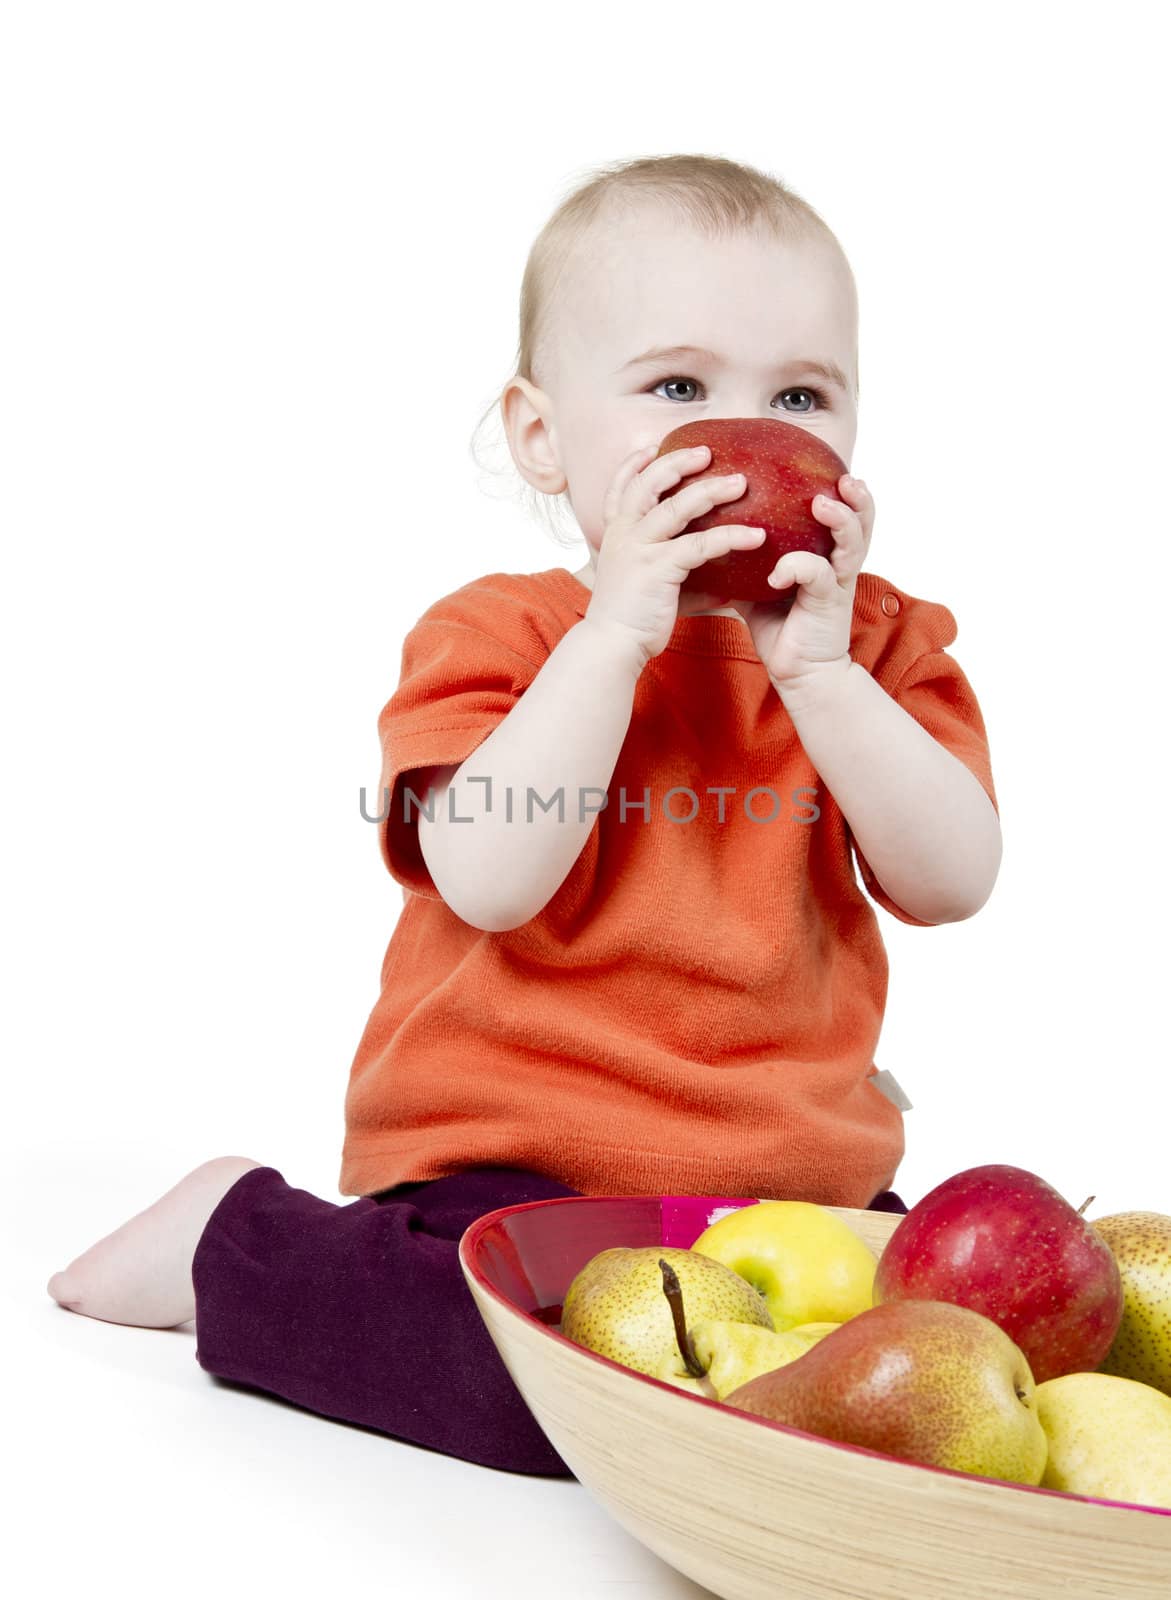 baby with apples by gewoldi